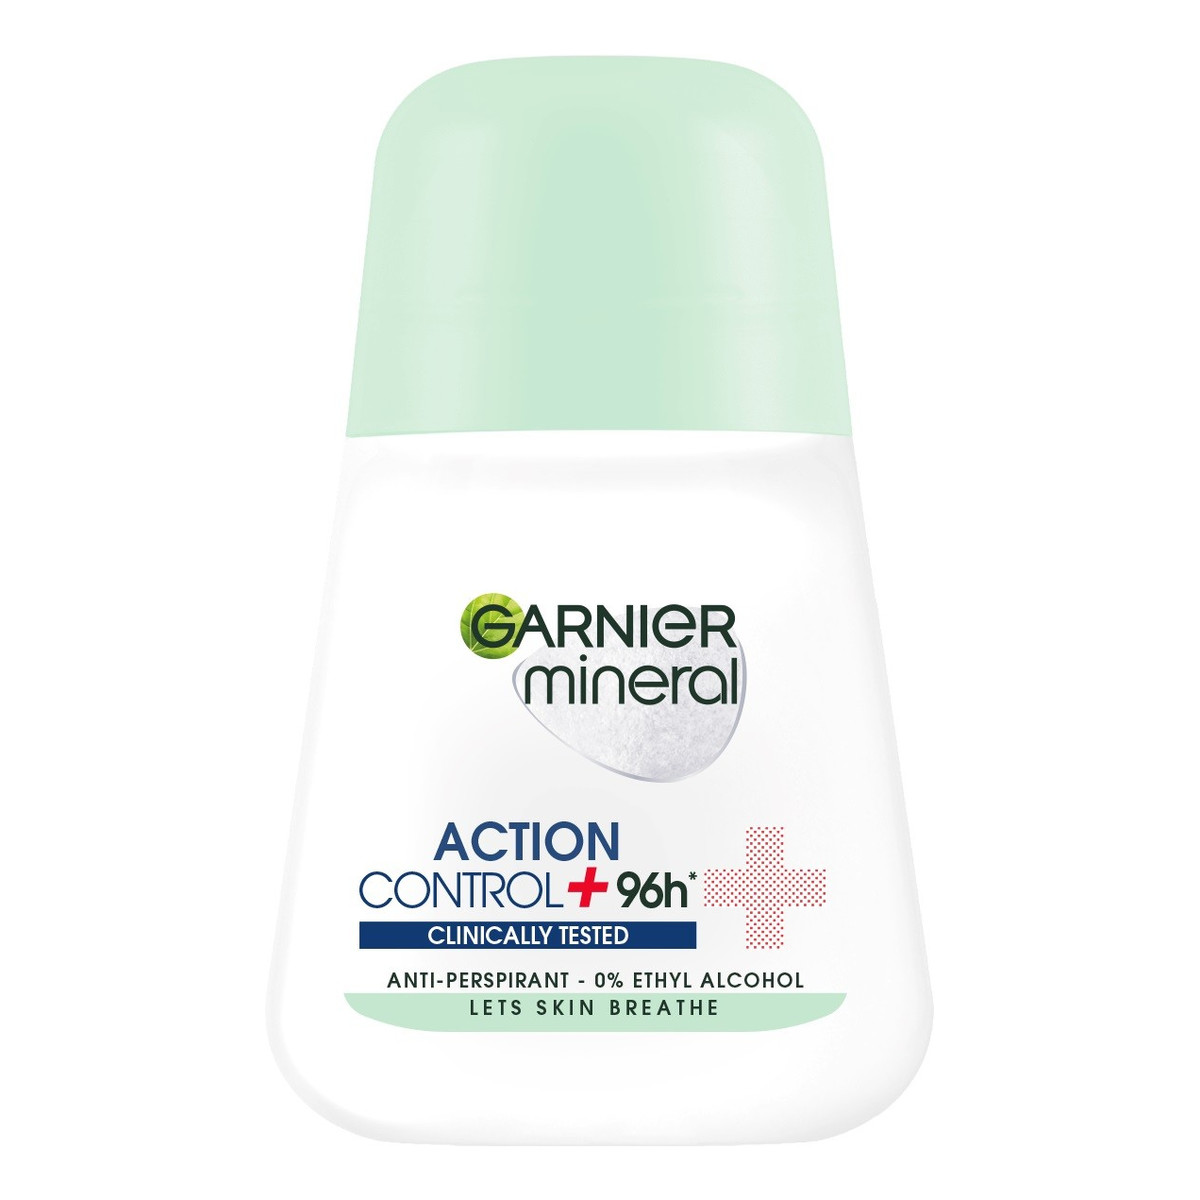 Garnier Mineral Dezodorant roll-on Action Control + Clinically Tested 96h 50ml